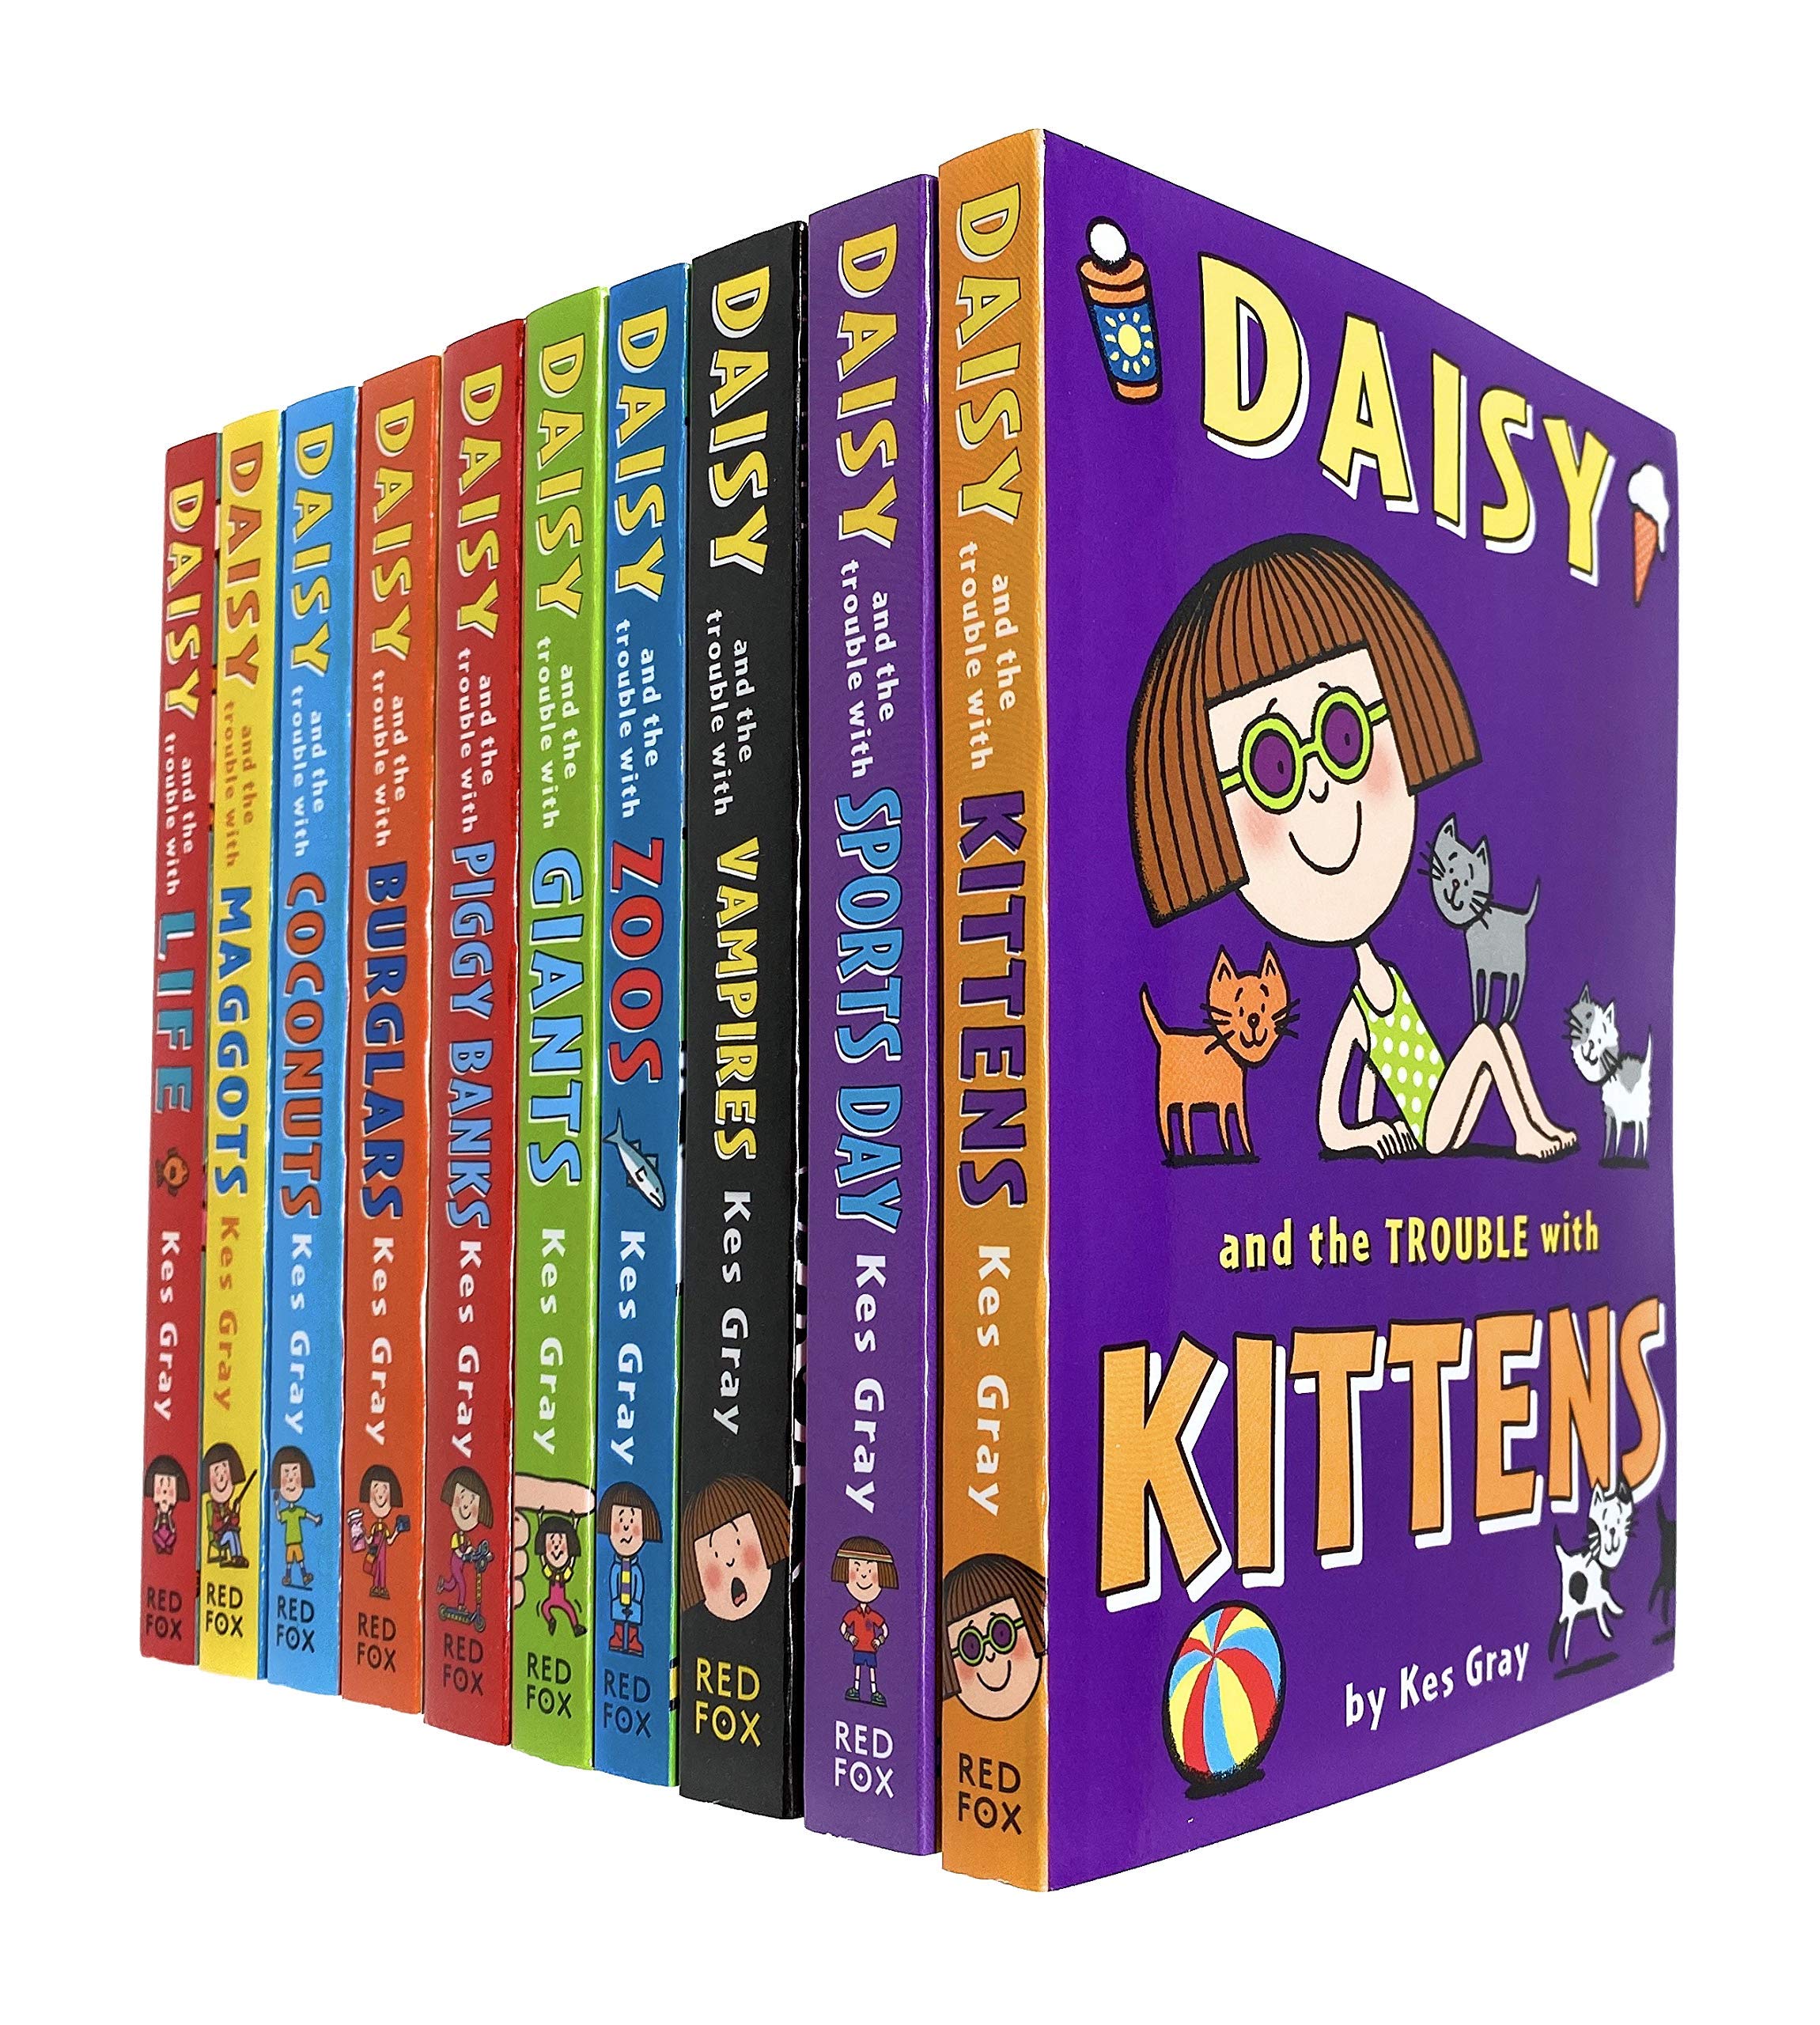 Daisy Fiction 10 Books Collection Set by Kes Gray ( Daisy and the Trouble with Zoos ) - Lets Buy Books